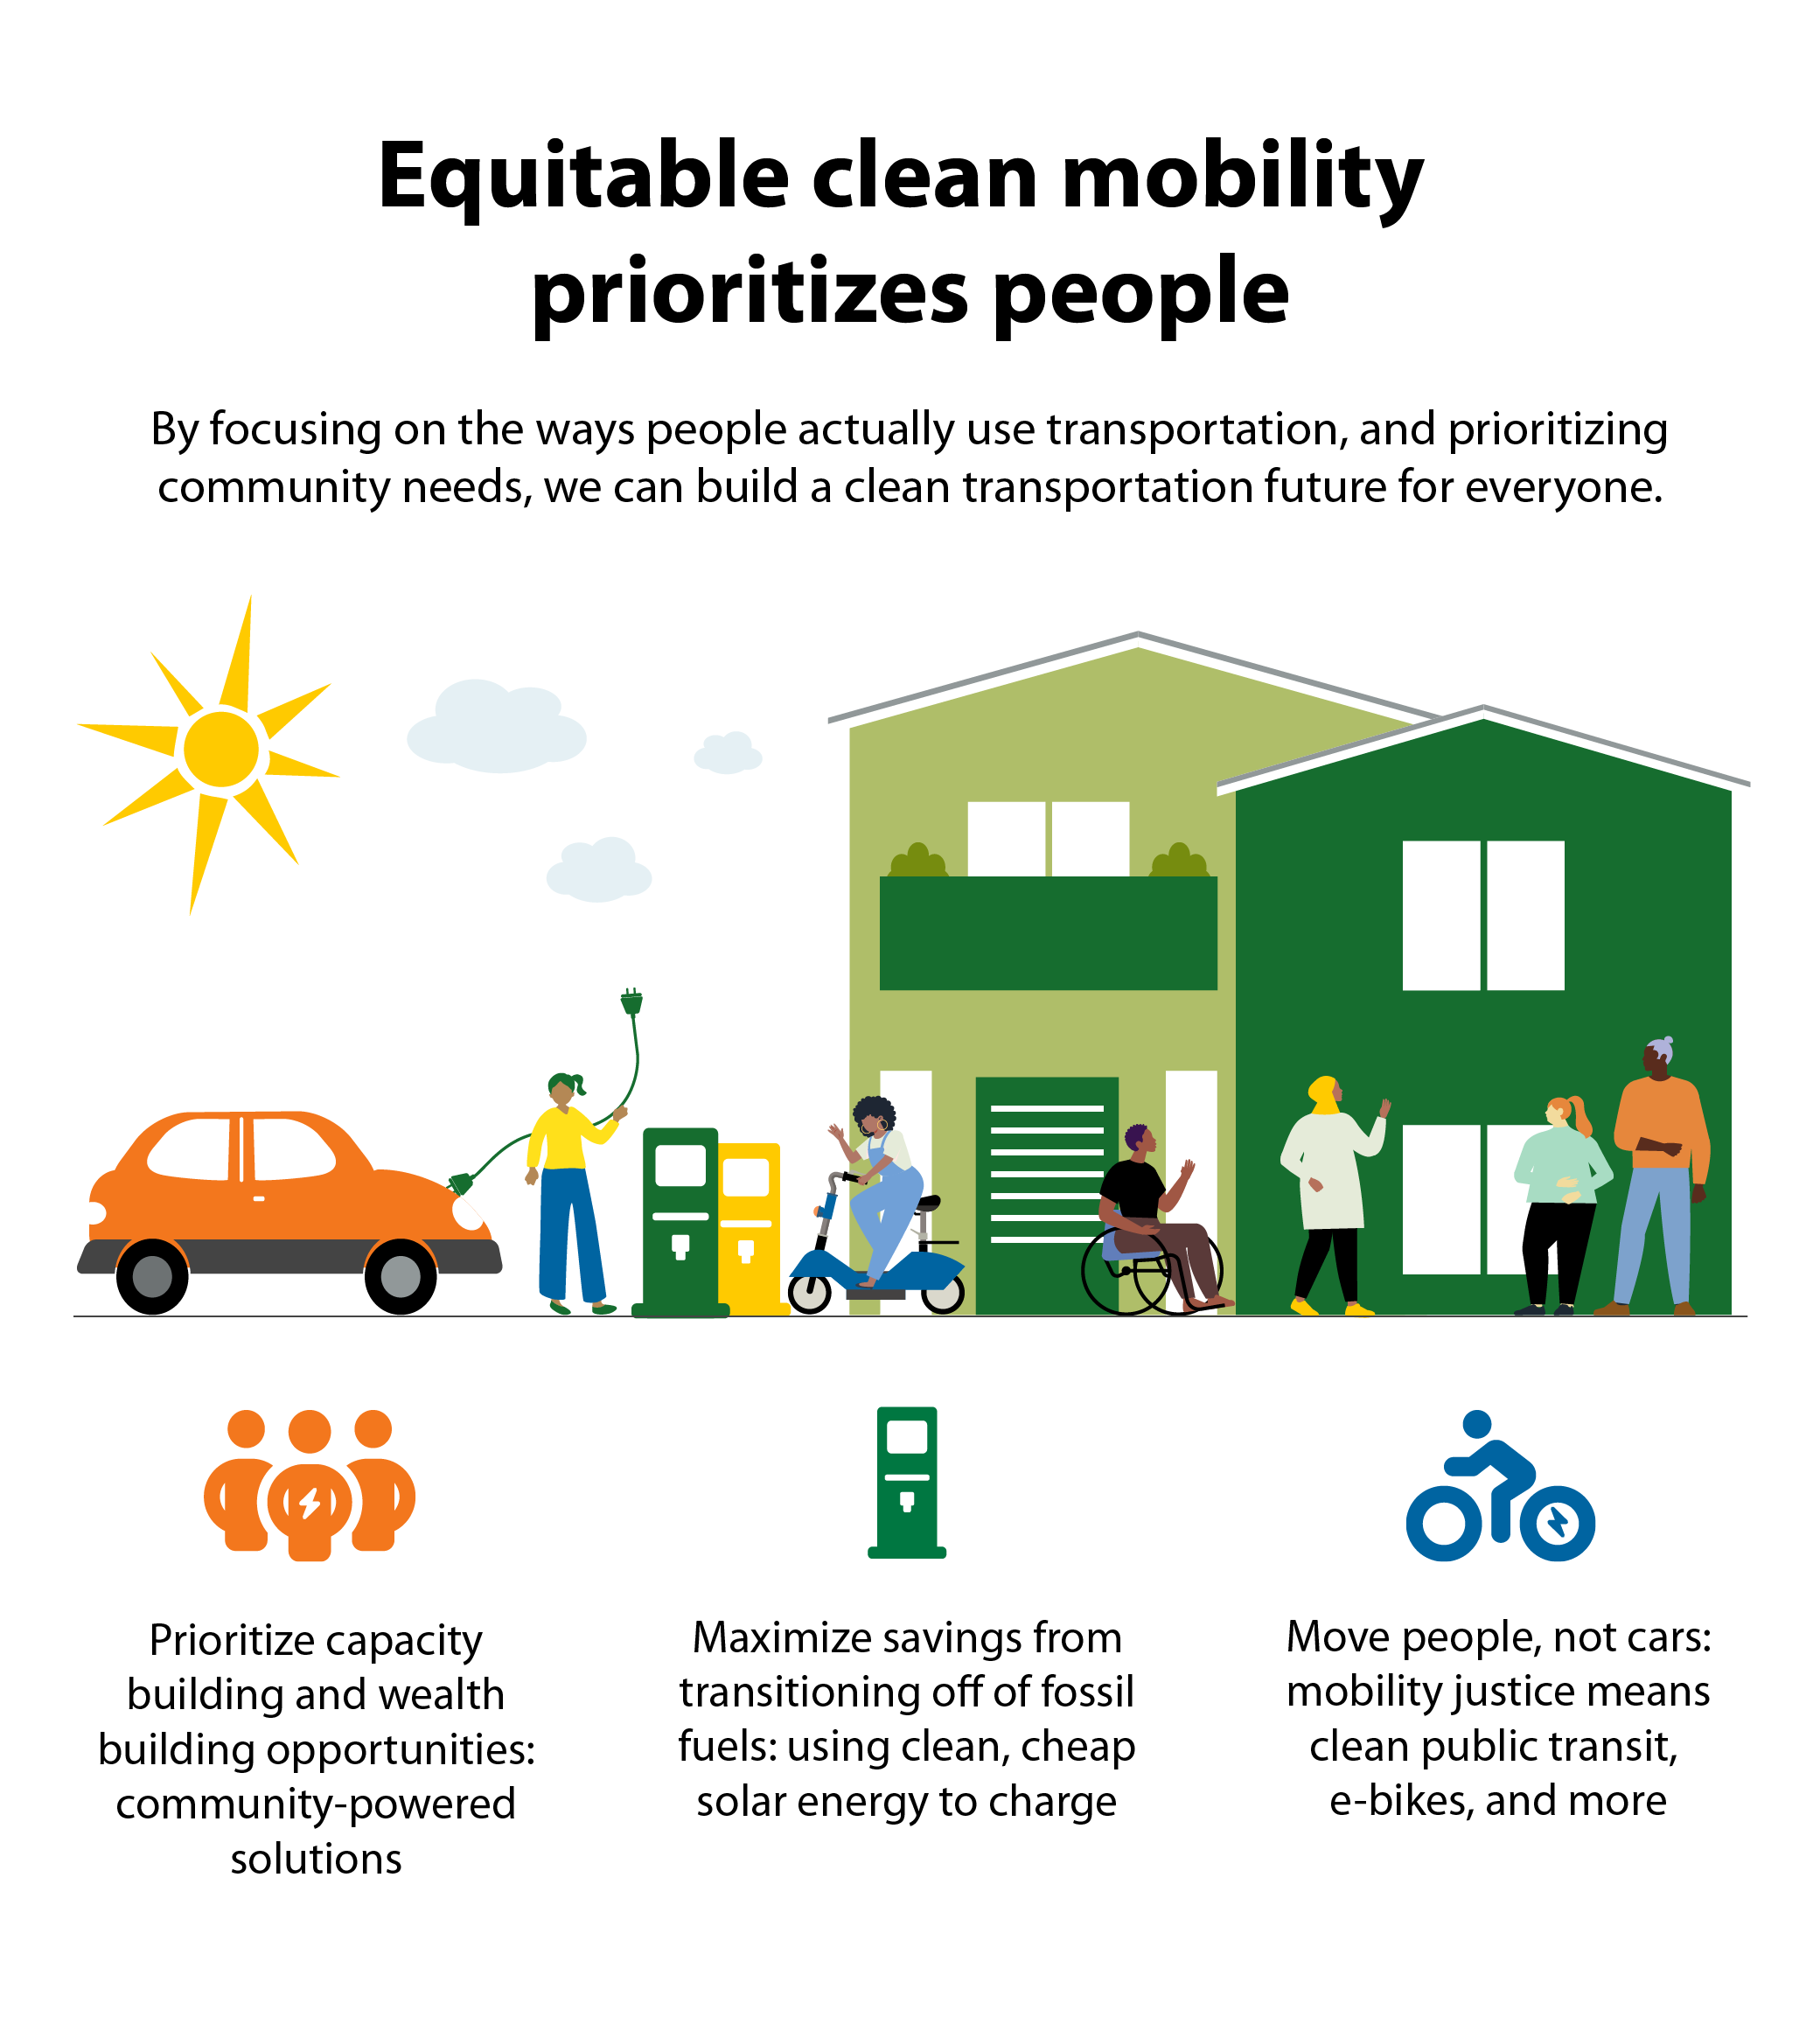 Equitable clean mobility prioritizes people. By focusing on the ways people actually use transportation, and prioritizing community needs, we can build a clean transportation future for everyone. Prioritize capacity building and wealth building opportunities: community-powered solutions. Maximize savings from transitioning off of fossil fuels: using clean, cheap solar energy to charge.  Move people, not cars: mobility justice means clean public transit, e-bikes, and more.